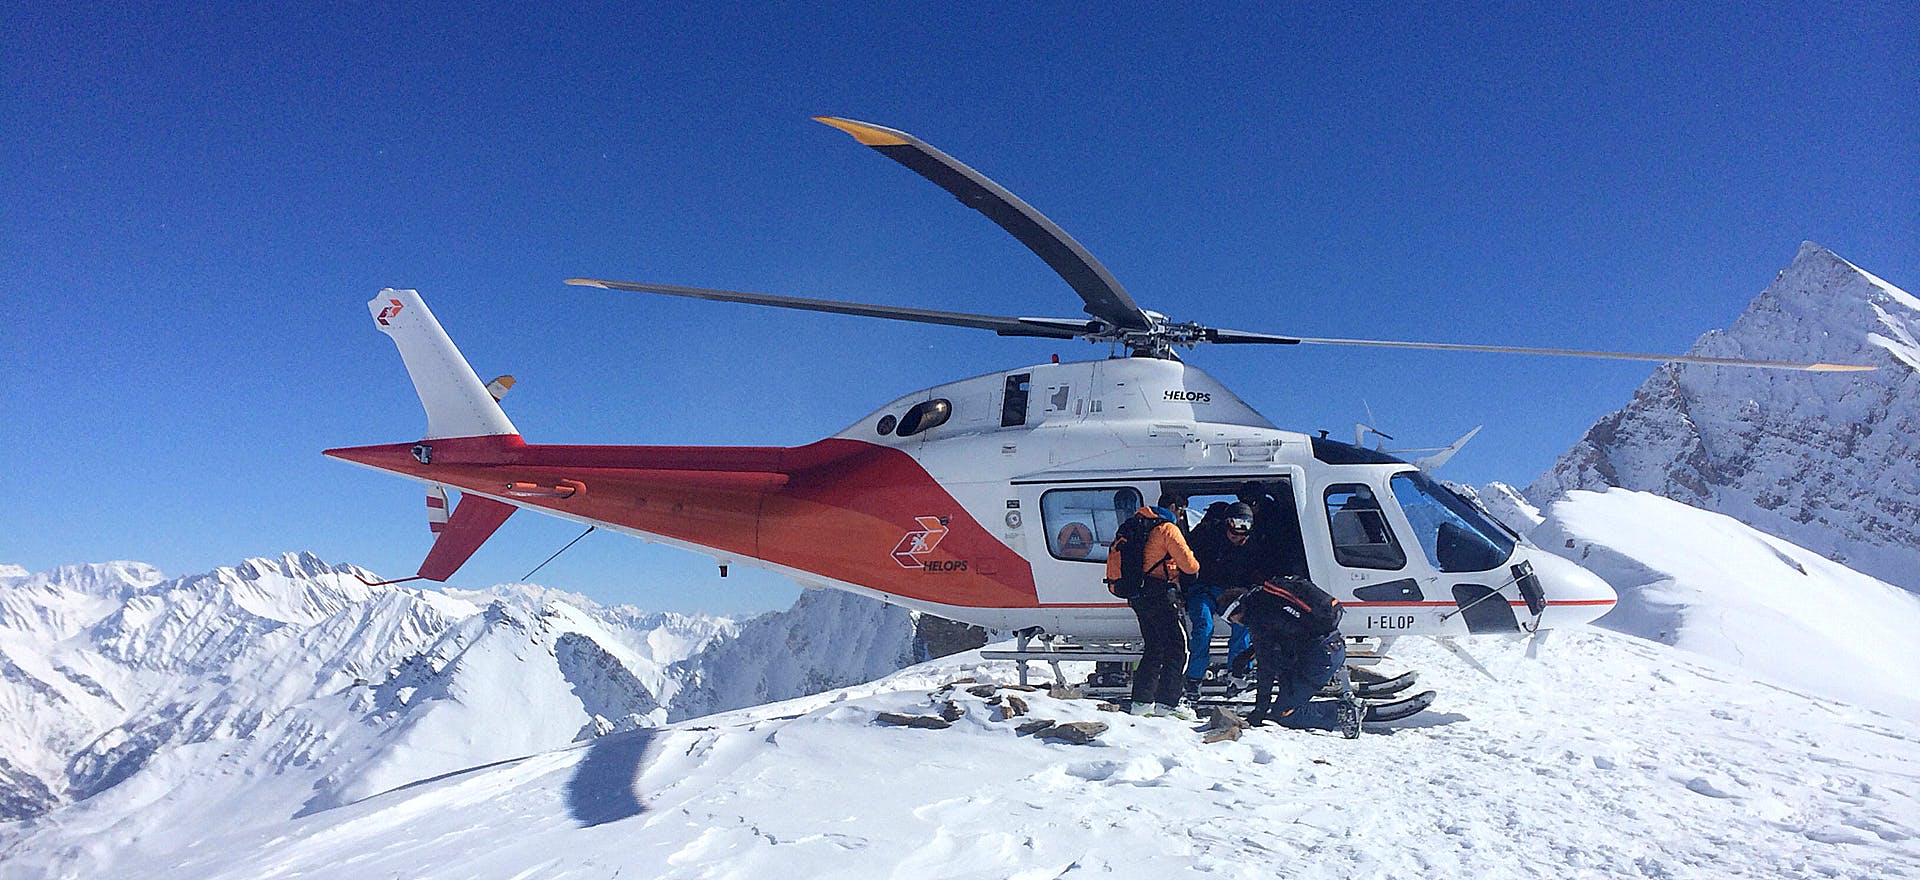 A Complete Guide for Helicopter Tours in Nepal